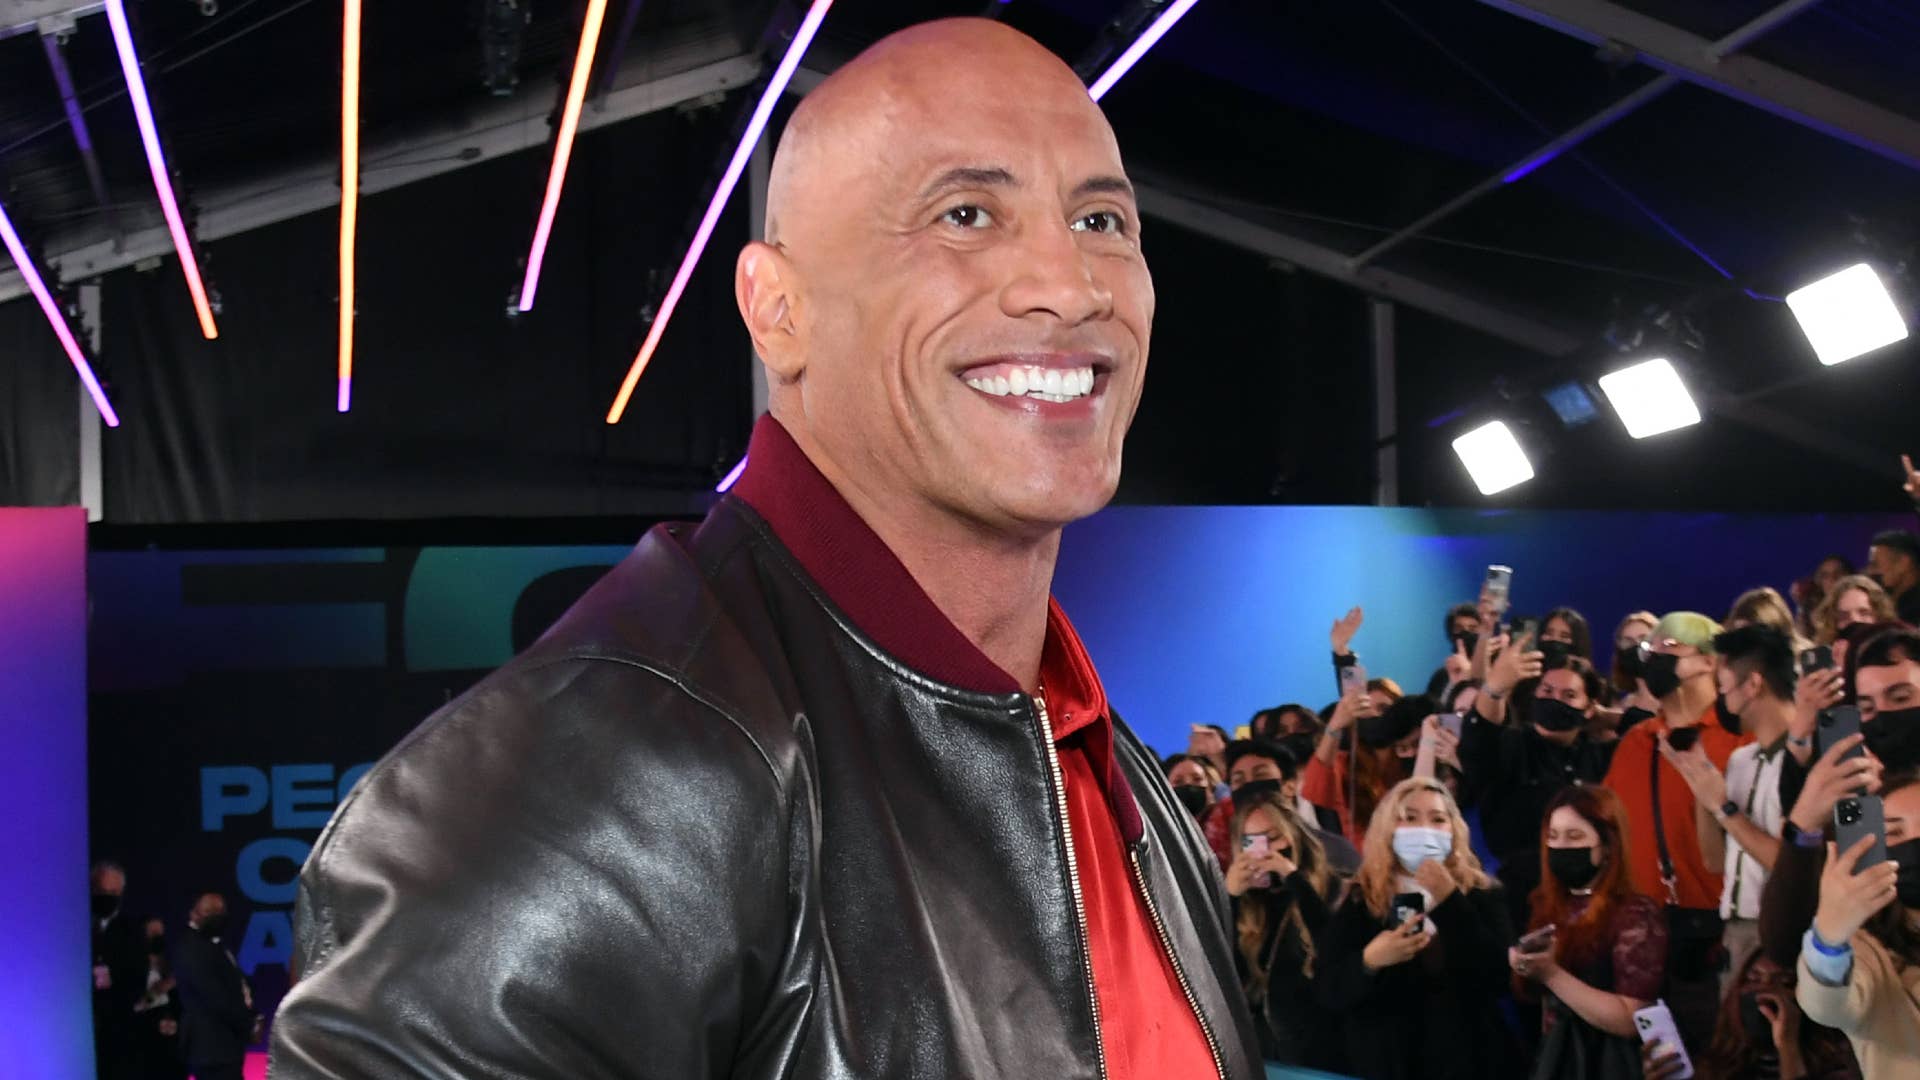 Dwayne Johnson is pictured smiling